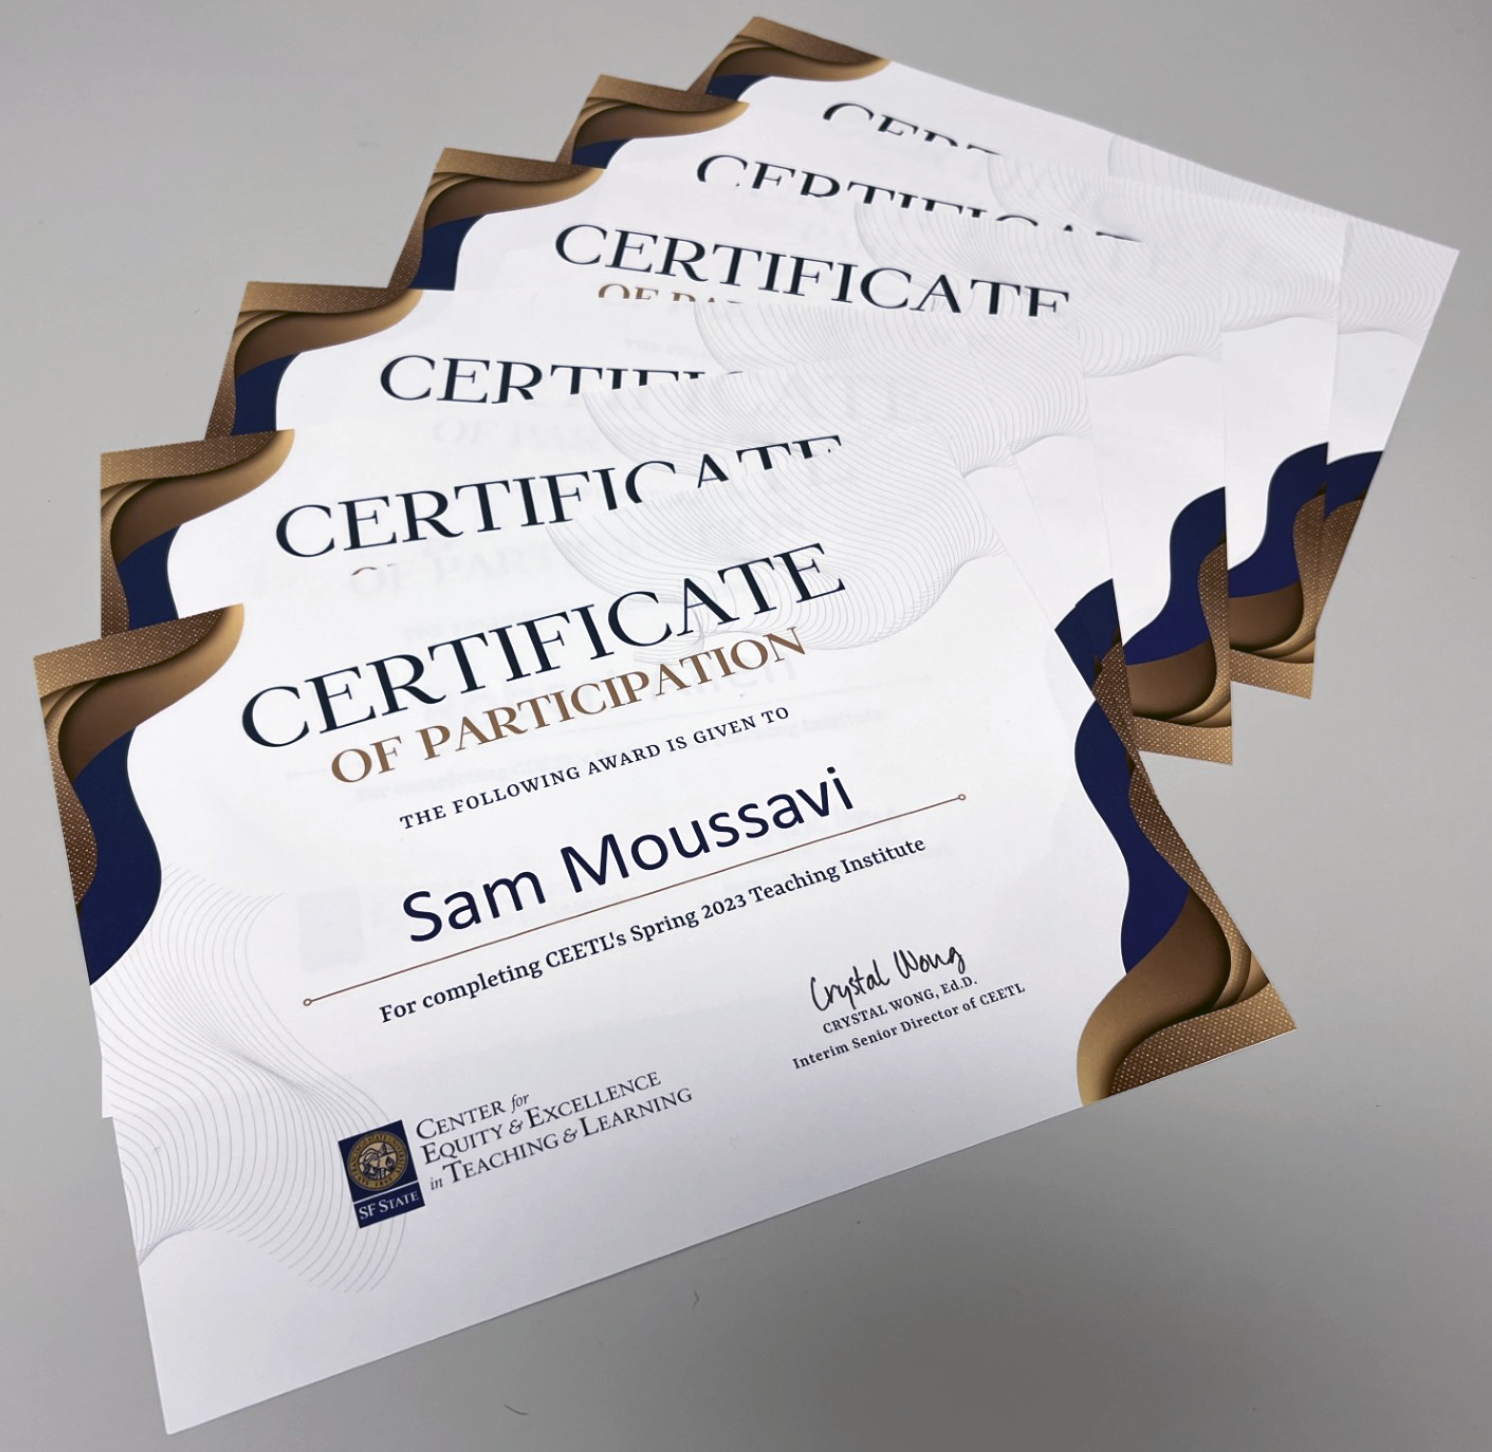 CEETL Certificates for End of Year